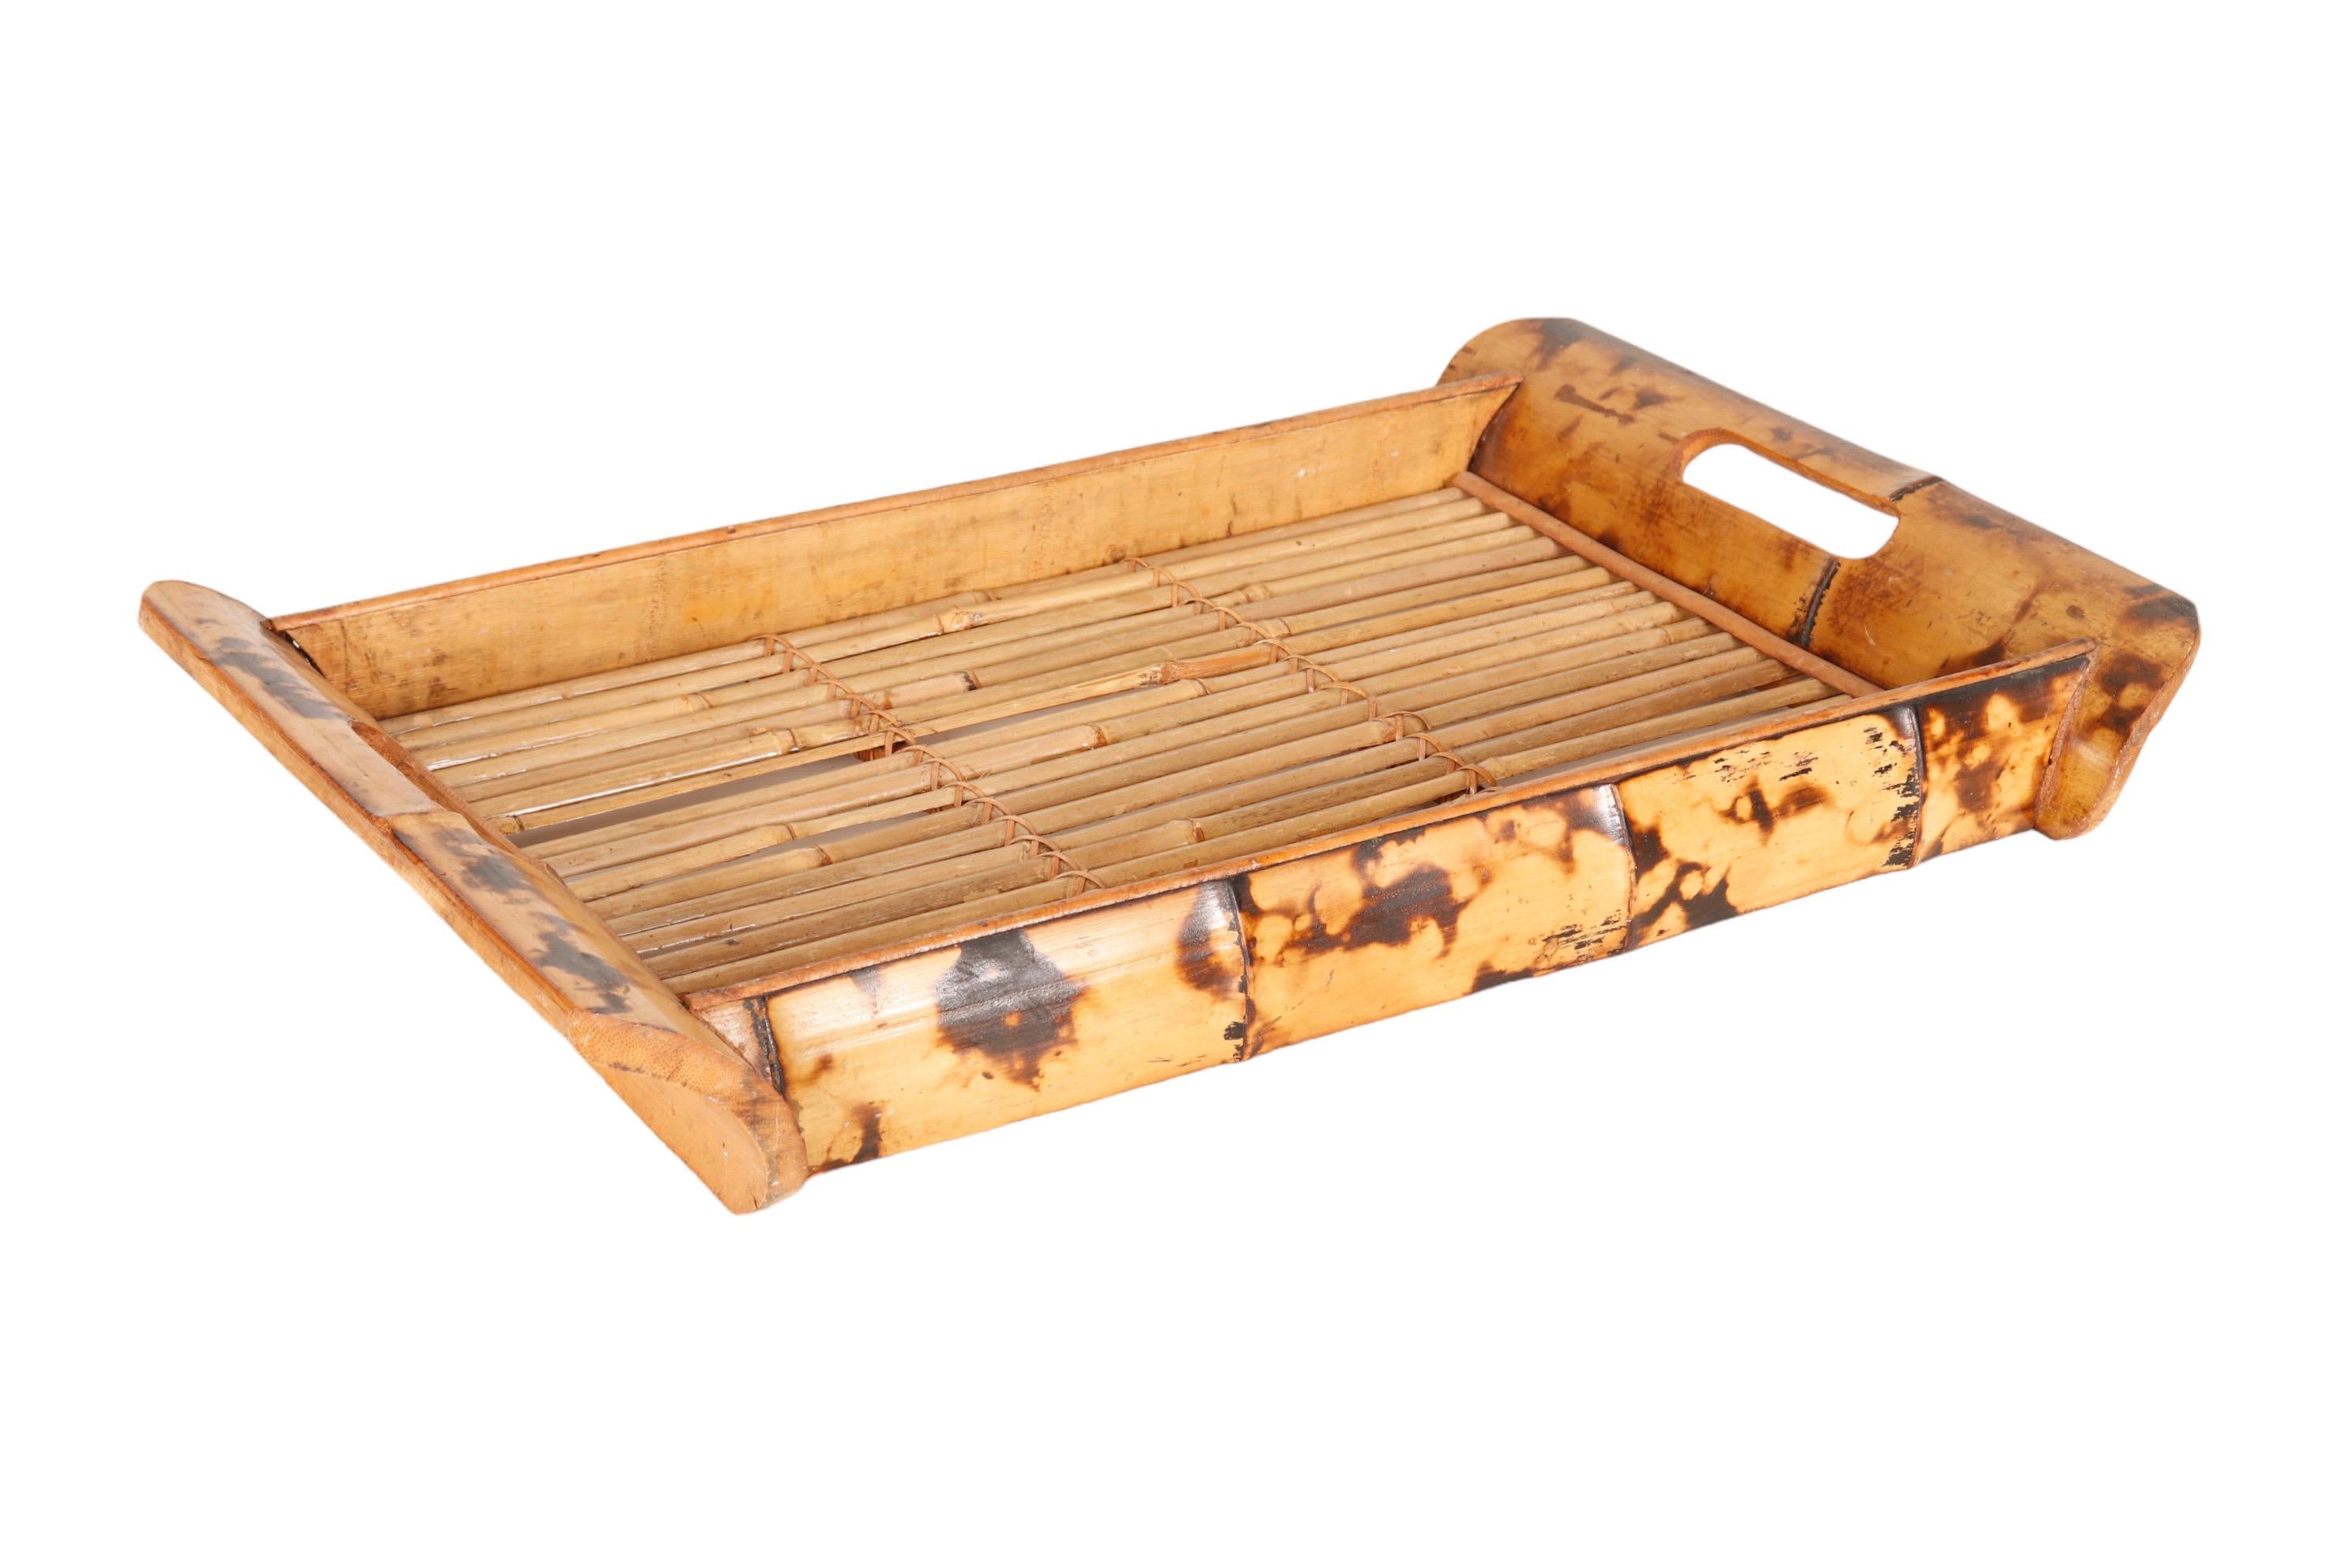 A tray made of split bamboo. Large pieces at each end are carved with curved corners and cartouche shaped handles. The base of the tray is made with split pencil wood bamboo.
